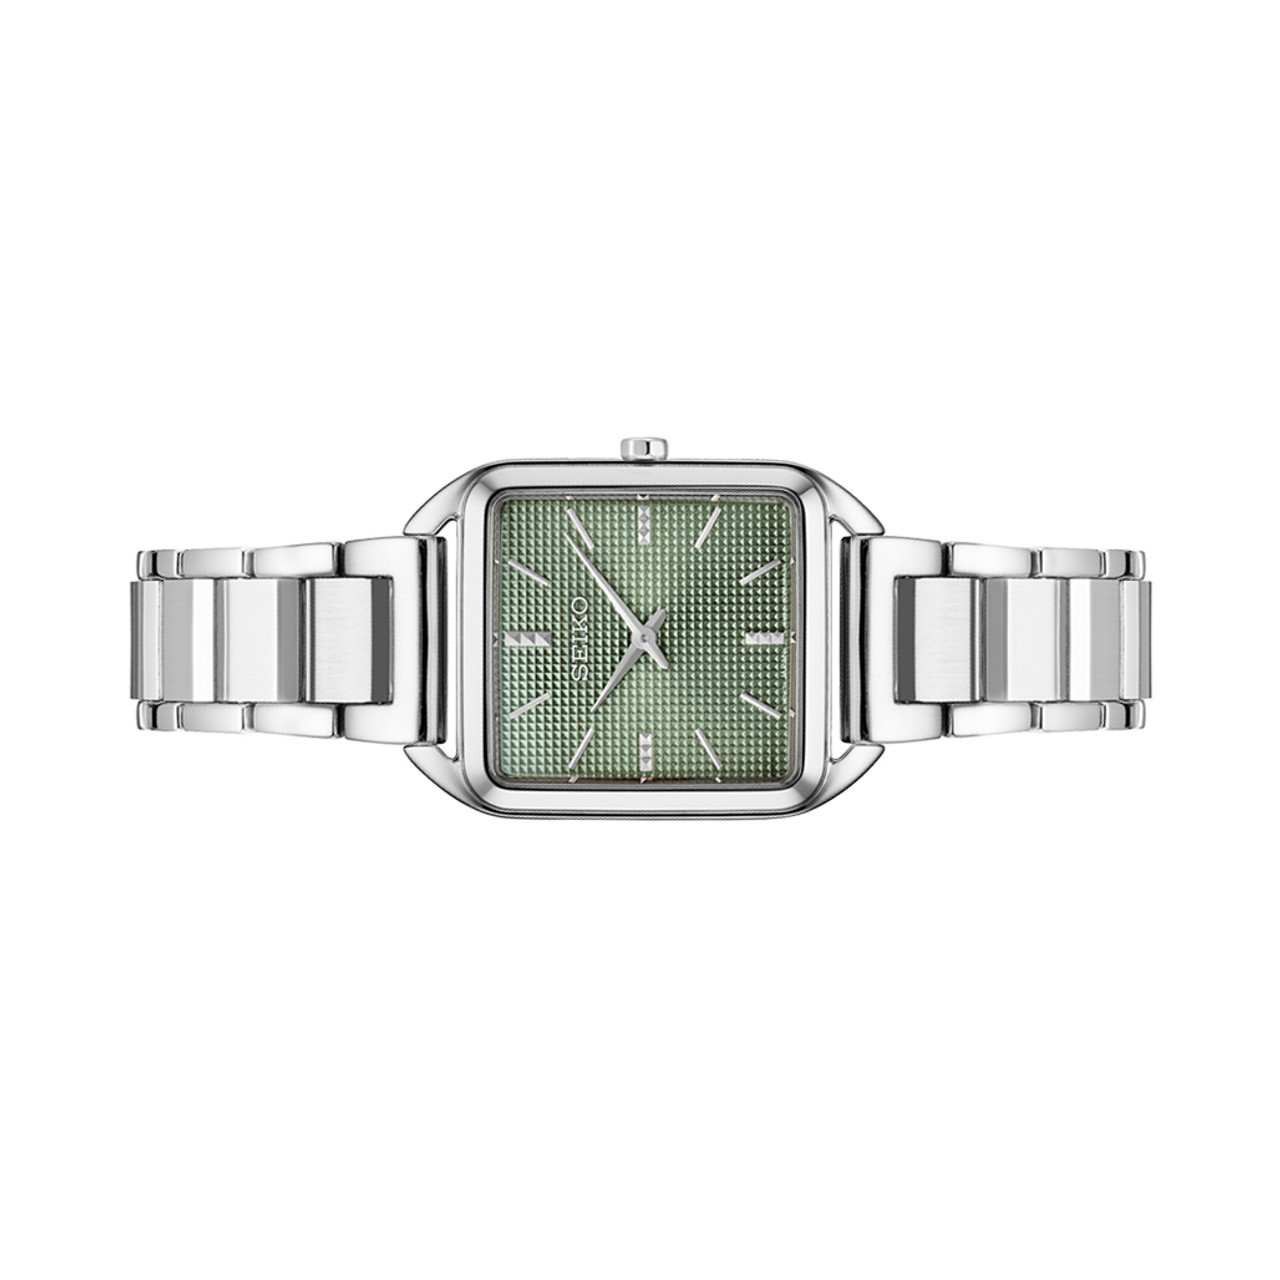 Seiko Essentials Tank Watch with Green Grid Pattern Dial #SWR075